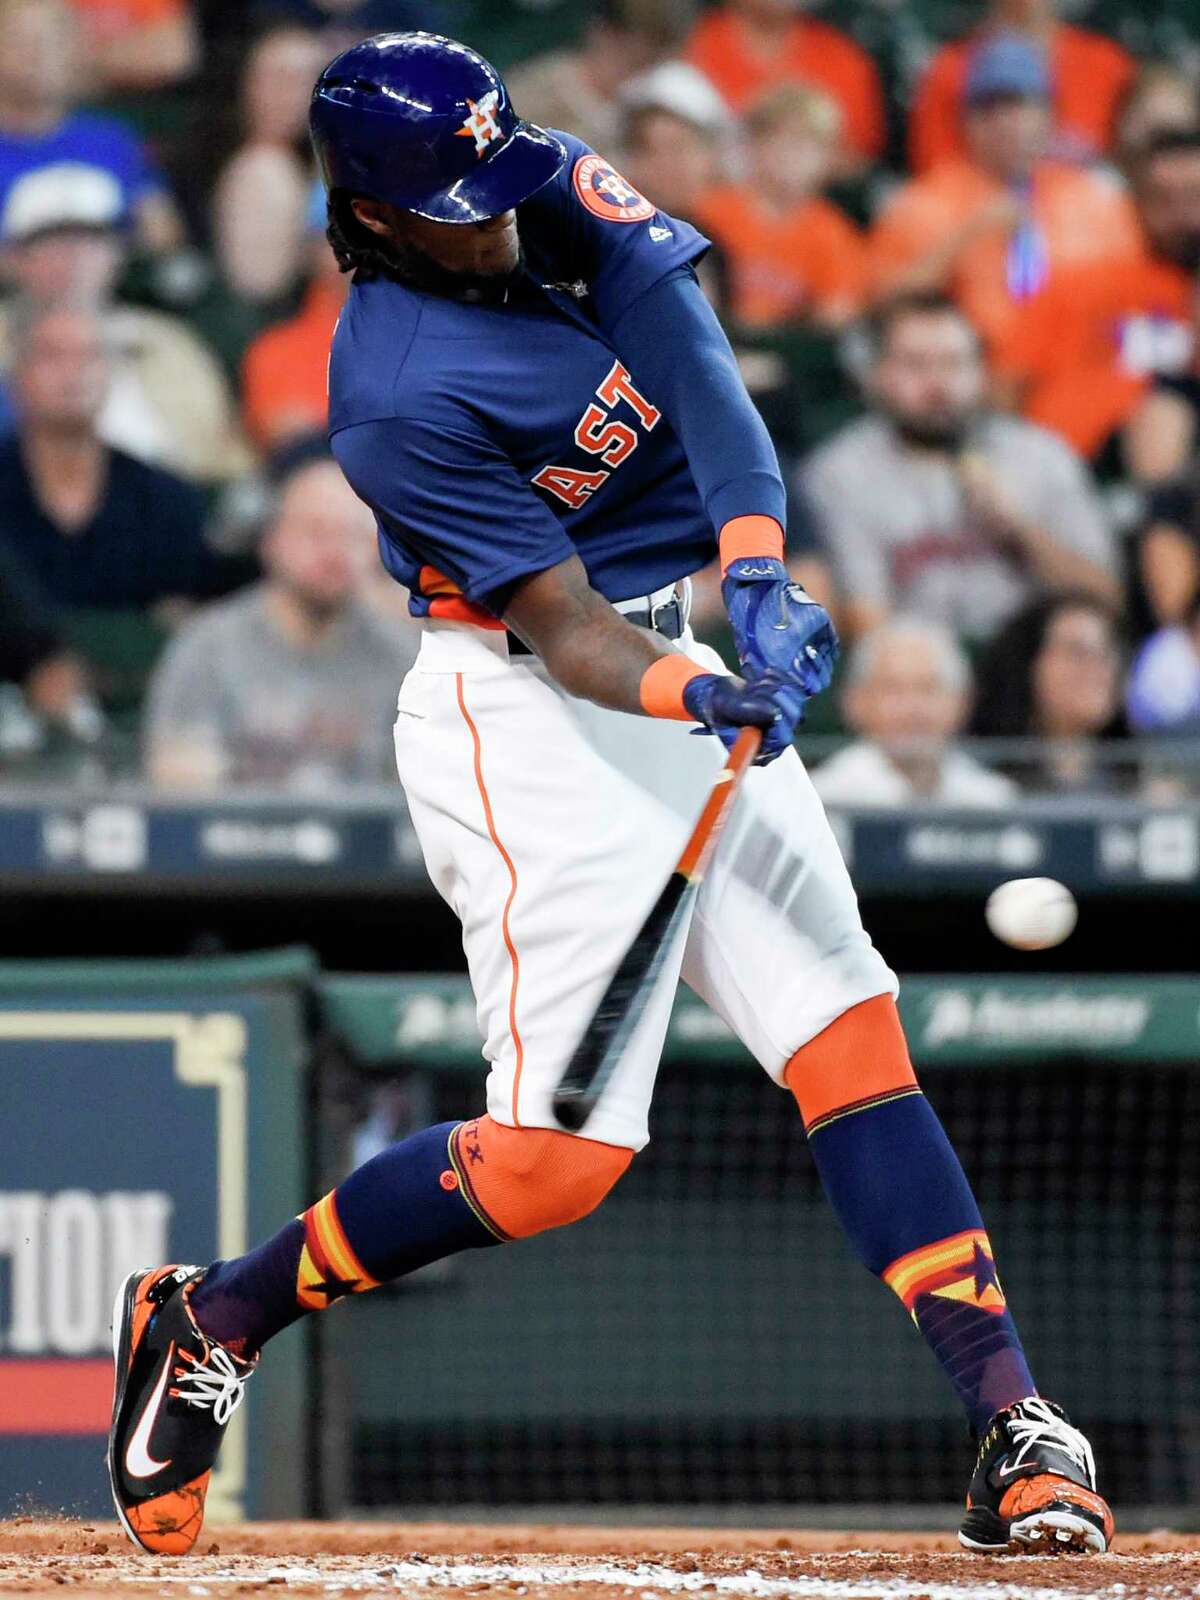 Houston Astros' Cameron Maybin hits a three-run home run off New York Mets starting pitcher Chris Flexen during the third inning of a baseball game, Sunday, Sept. 3, 2017, in Houston. (AP Photo/Eric Christian Smith)